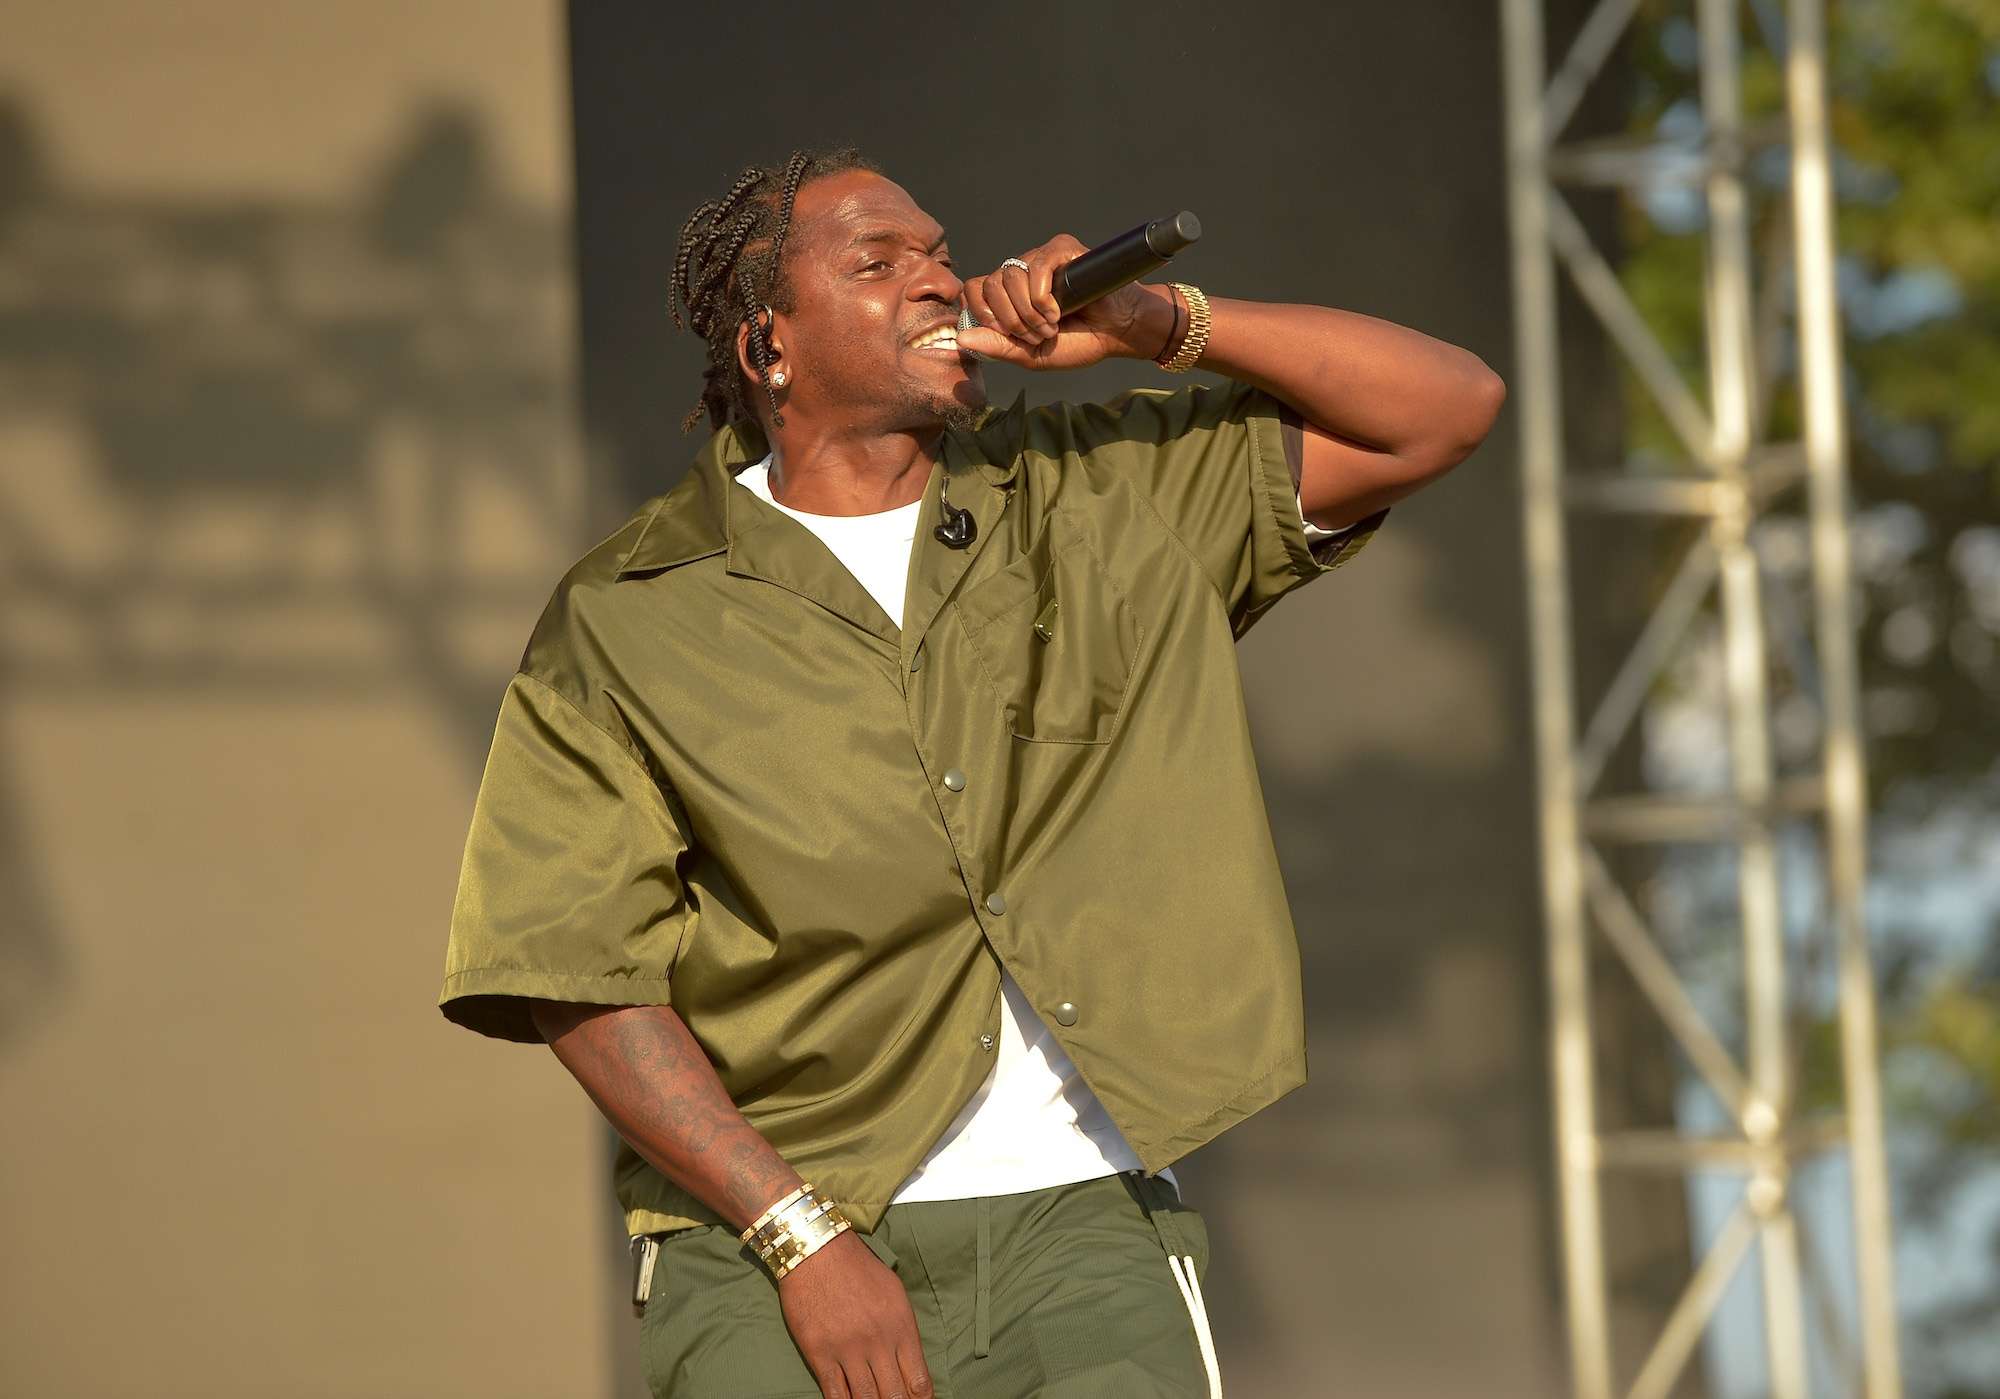 Pusha T Live at Pitchfork [GALLERY] 17